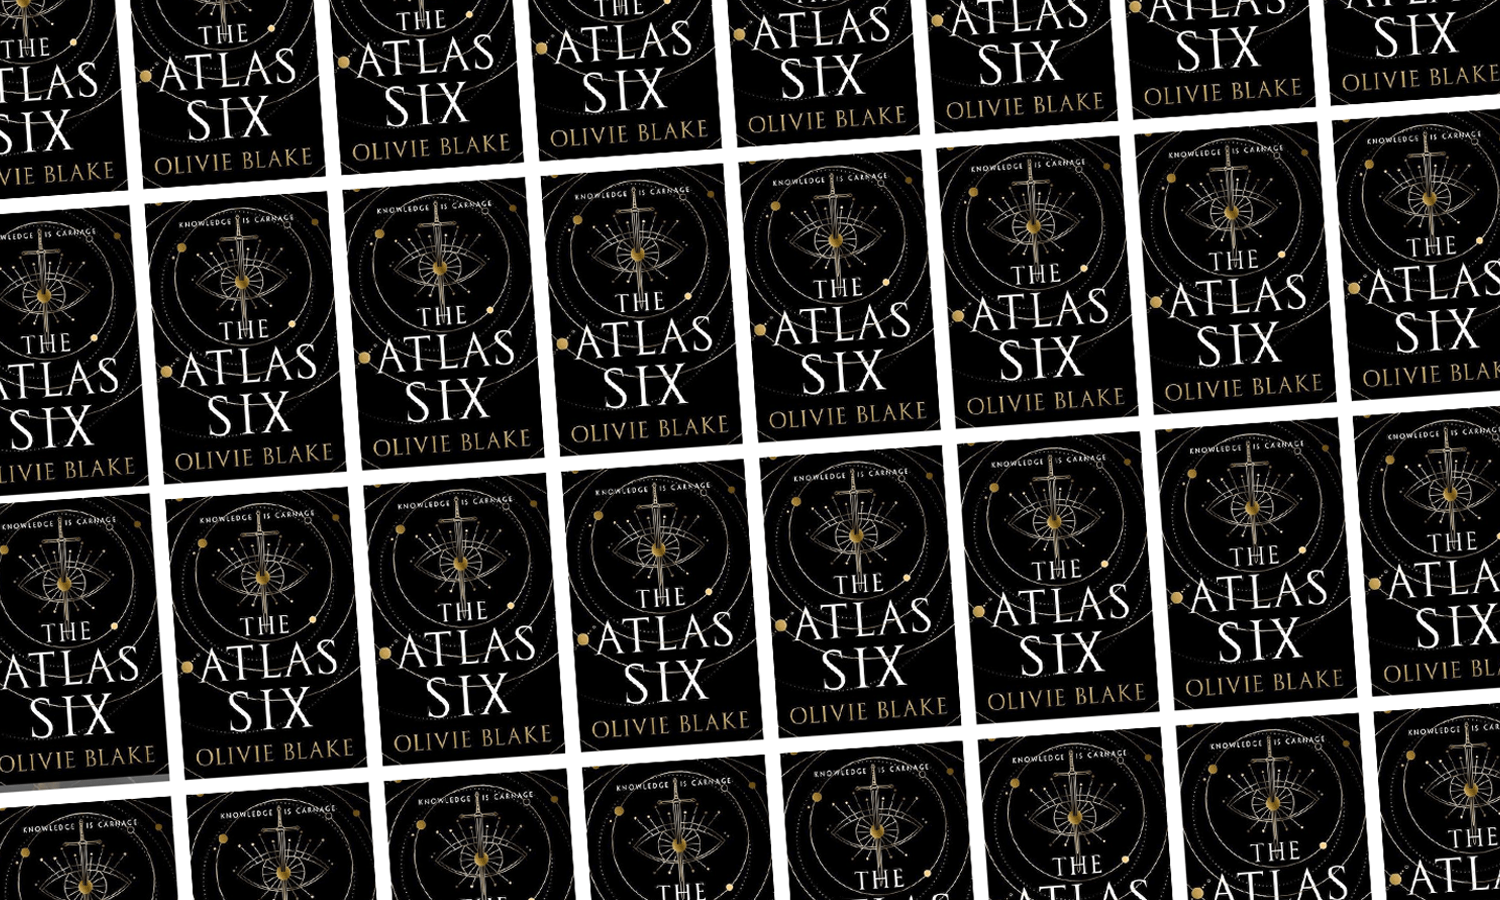 Knowledge They Might Kill For: Olivie Blake's The Atlas Six - Reactor